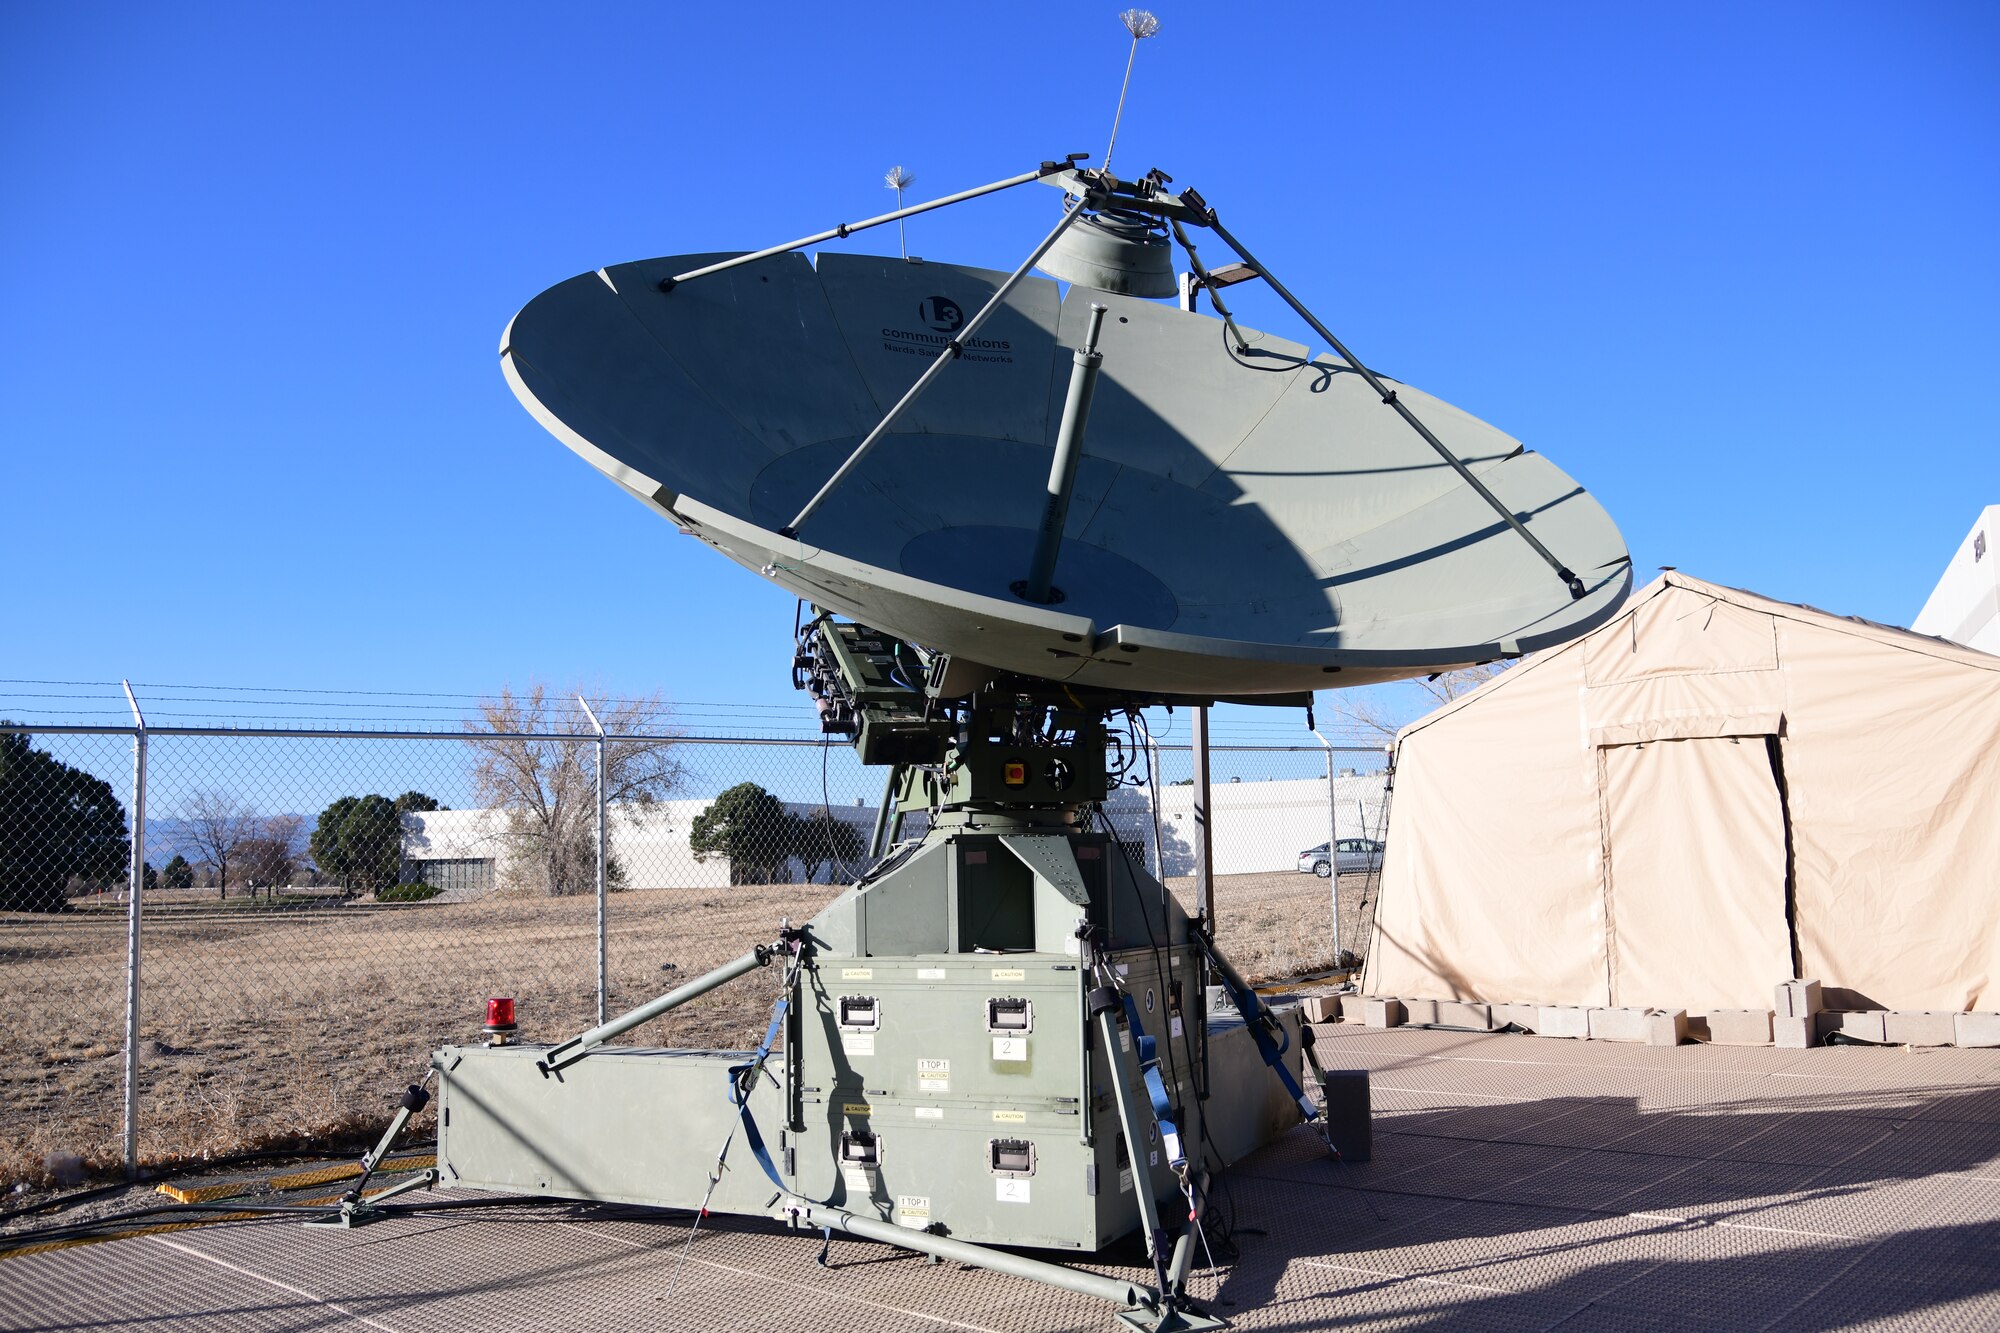 A satellite used by the 26th Space Aggressor Squadron, Nov. 5, 2020 at Colorado Springs, Colorado. Members of the 26th SAS are participating in Red Flag 21-1 at Nellis Air Force Base, Nevada and deliver expertise in satellite communication and GPS electronic attack, and how those effects are integrated with air, air defense, and cyber to help create realistic enemy threats and tactics for those participating in the exercise.